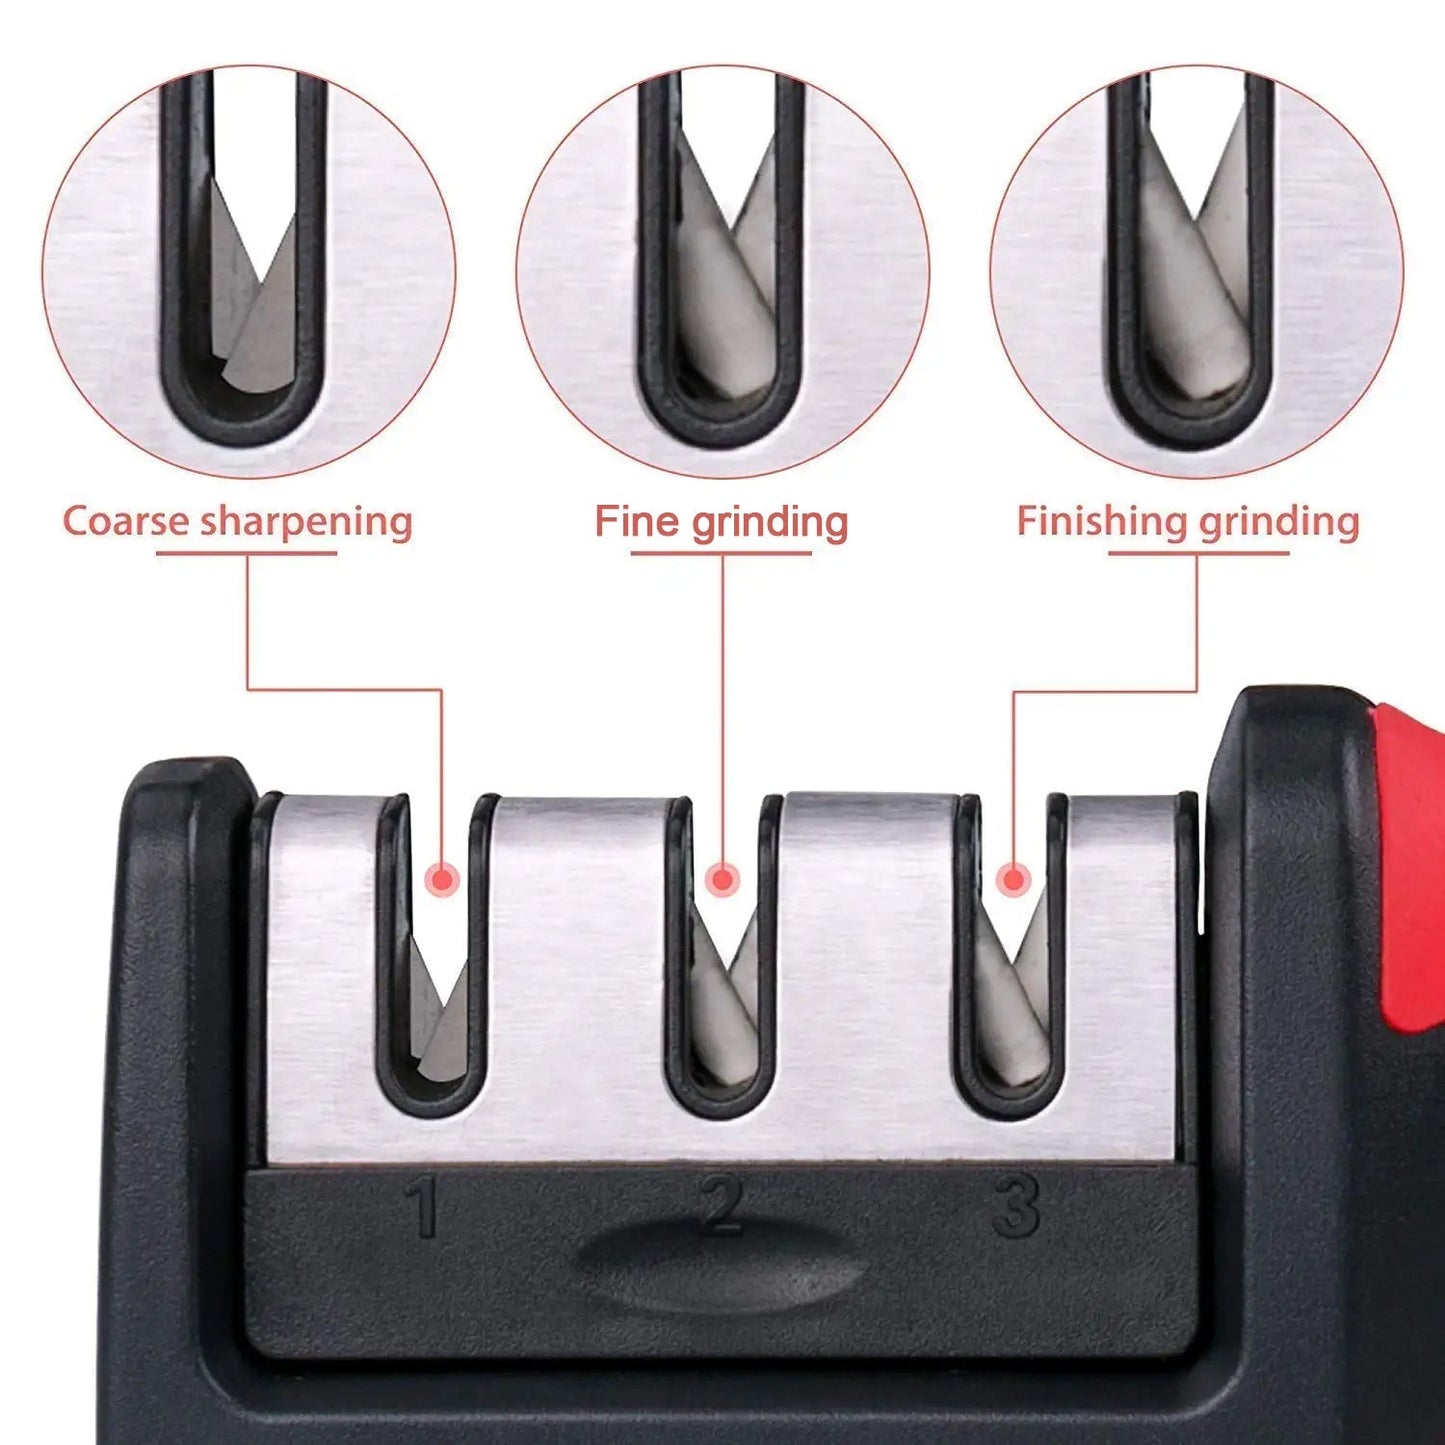 2051 Manual Red Knife Sharpener 3 Stage Sharpening Tool for Ceramic Knife and Steel Knives. DeoDap